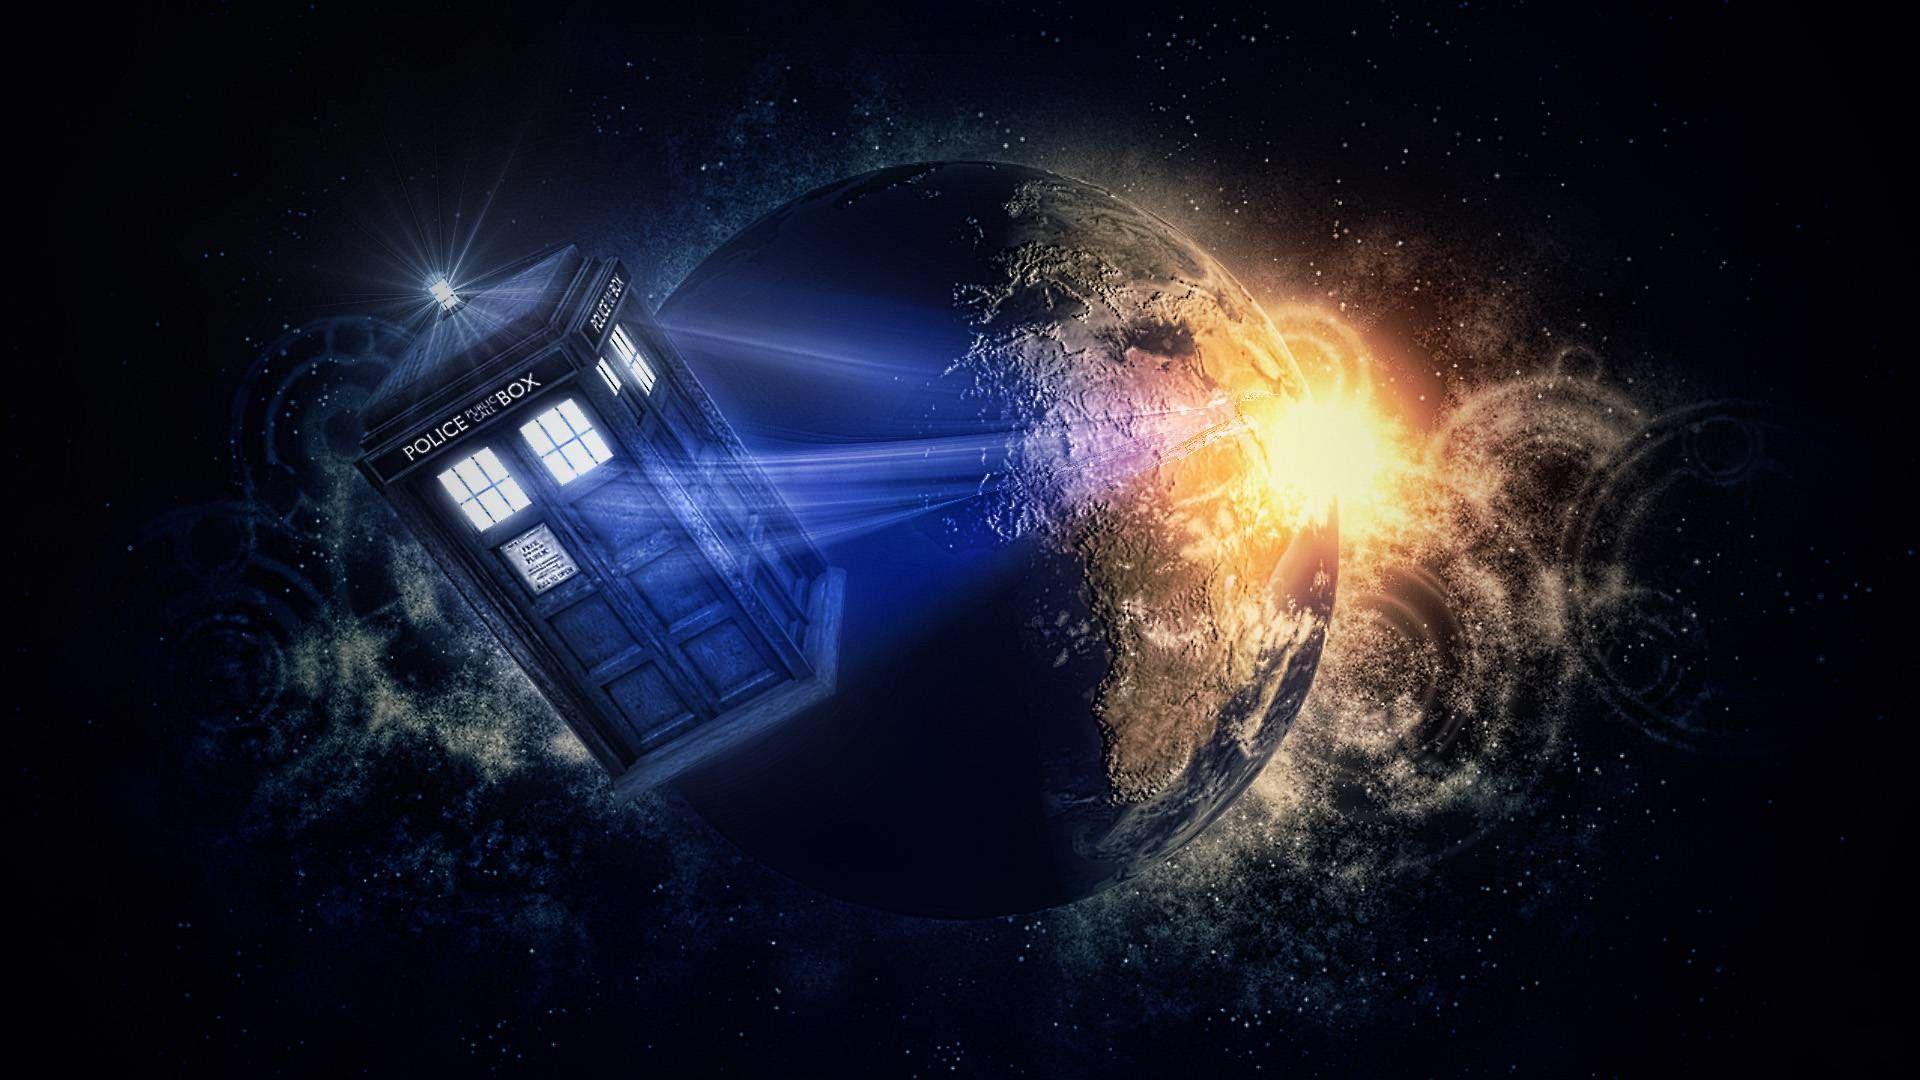 Doctor Who Wallpaper 1920x1080